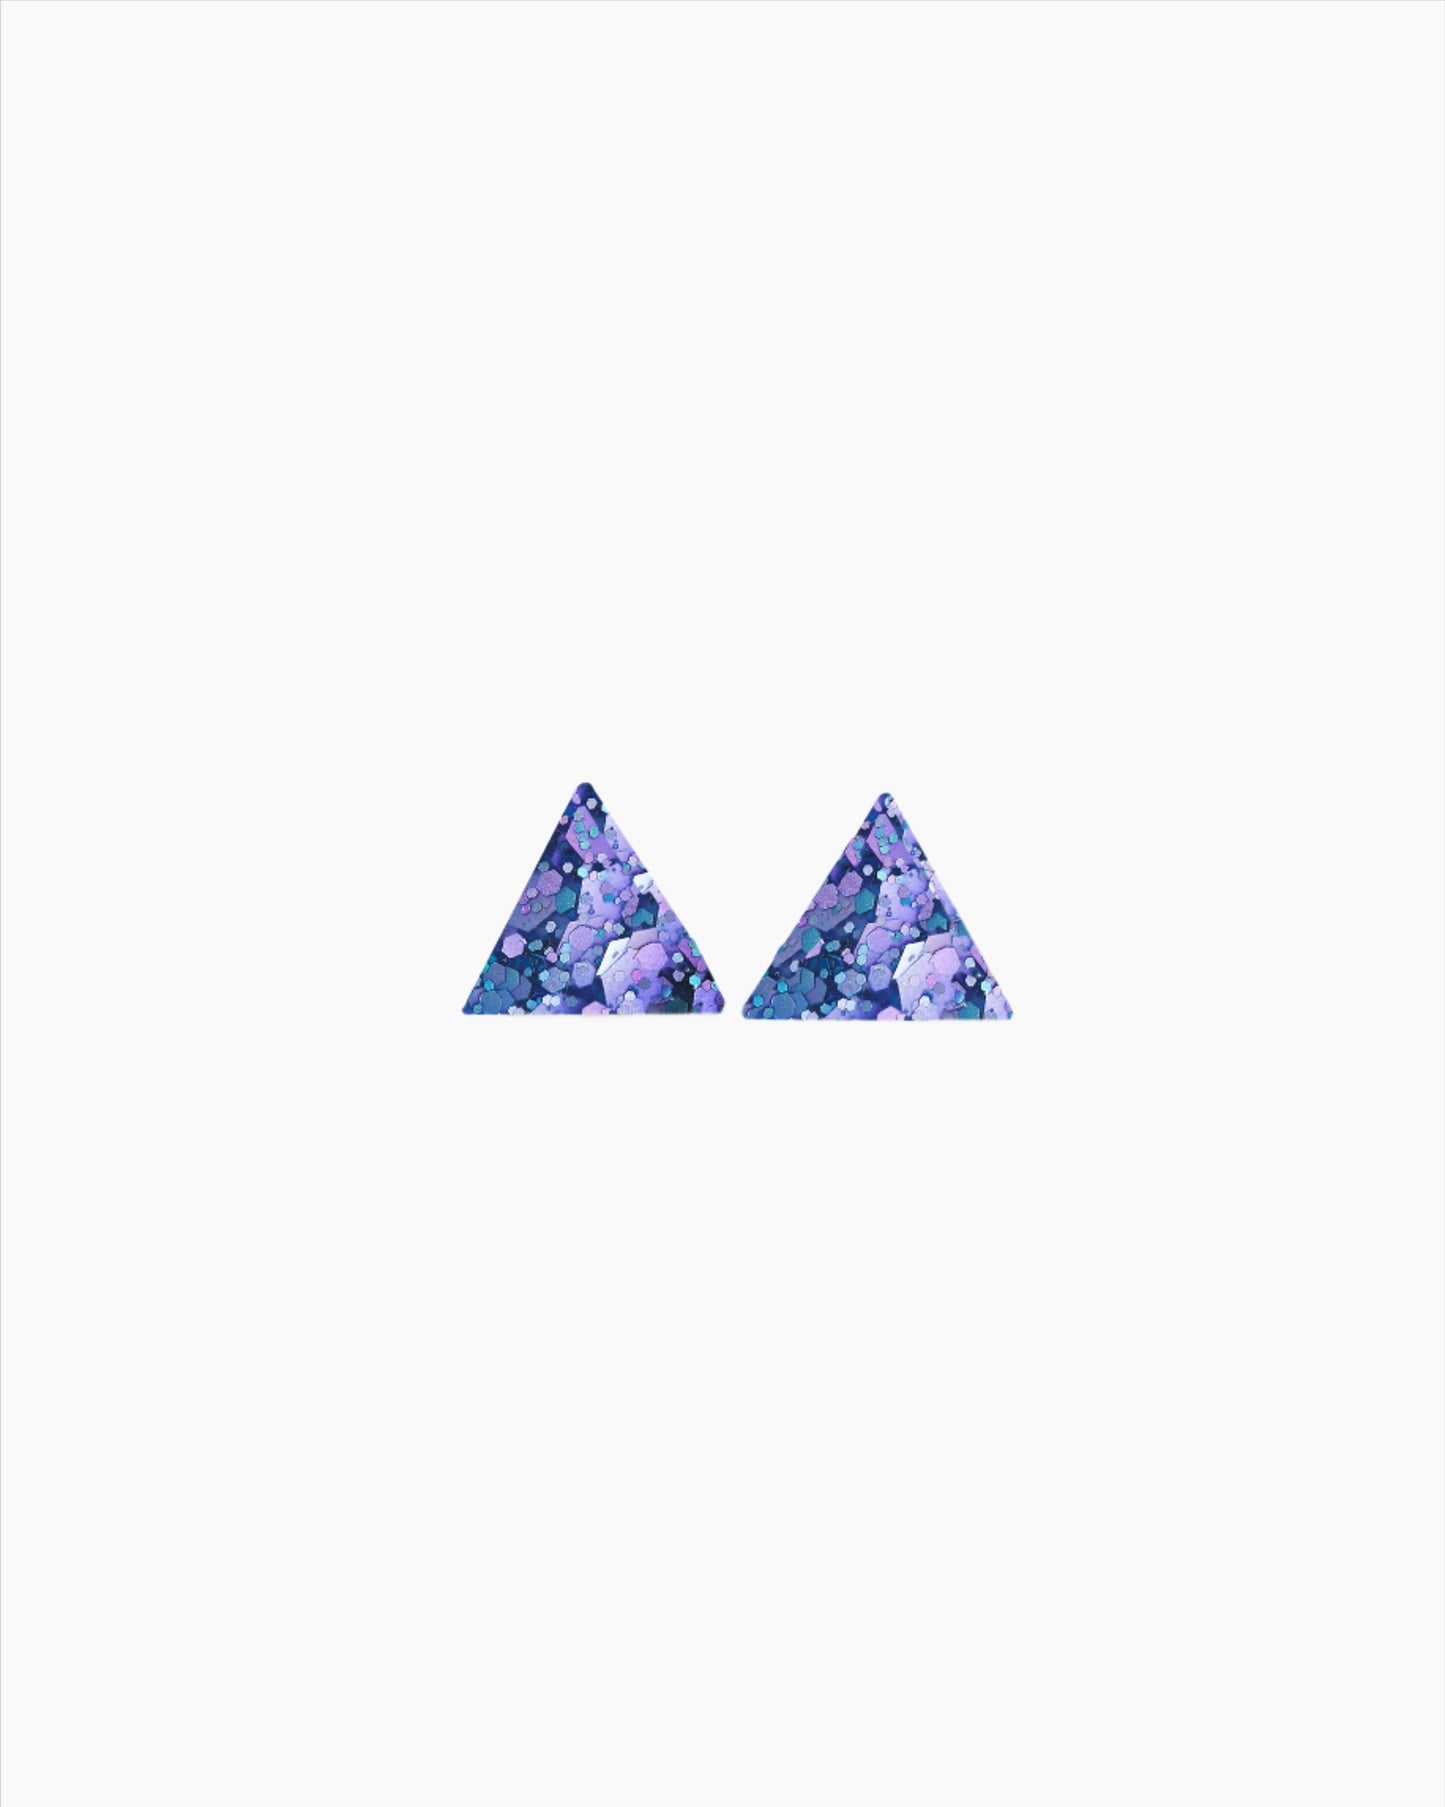 Minimalist triangle stud earrings with surgical steel posts